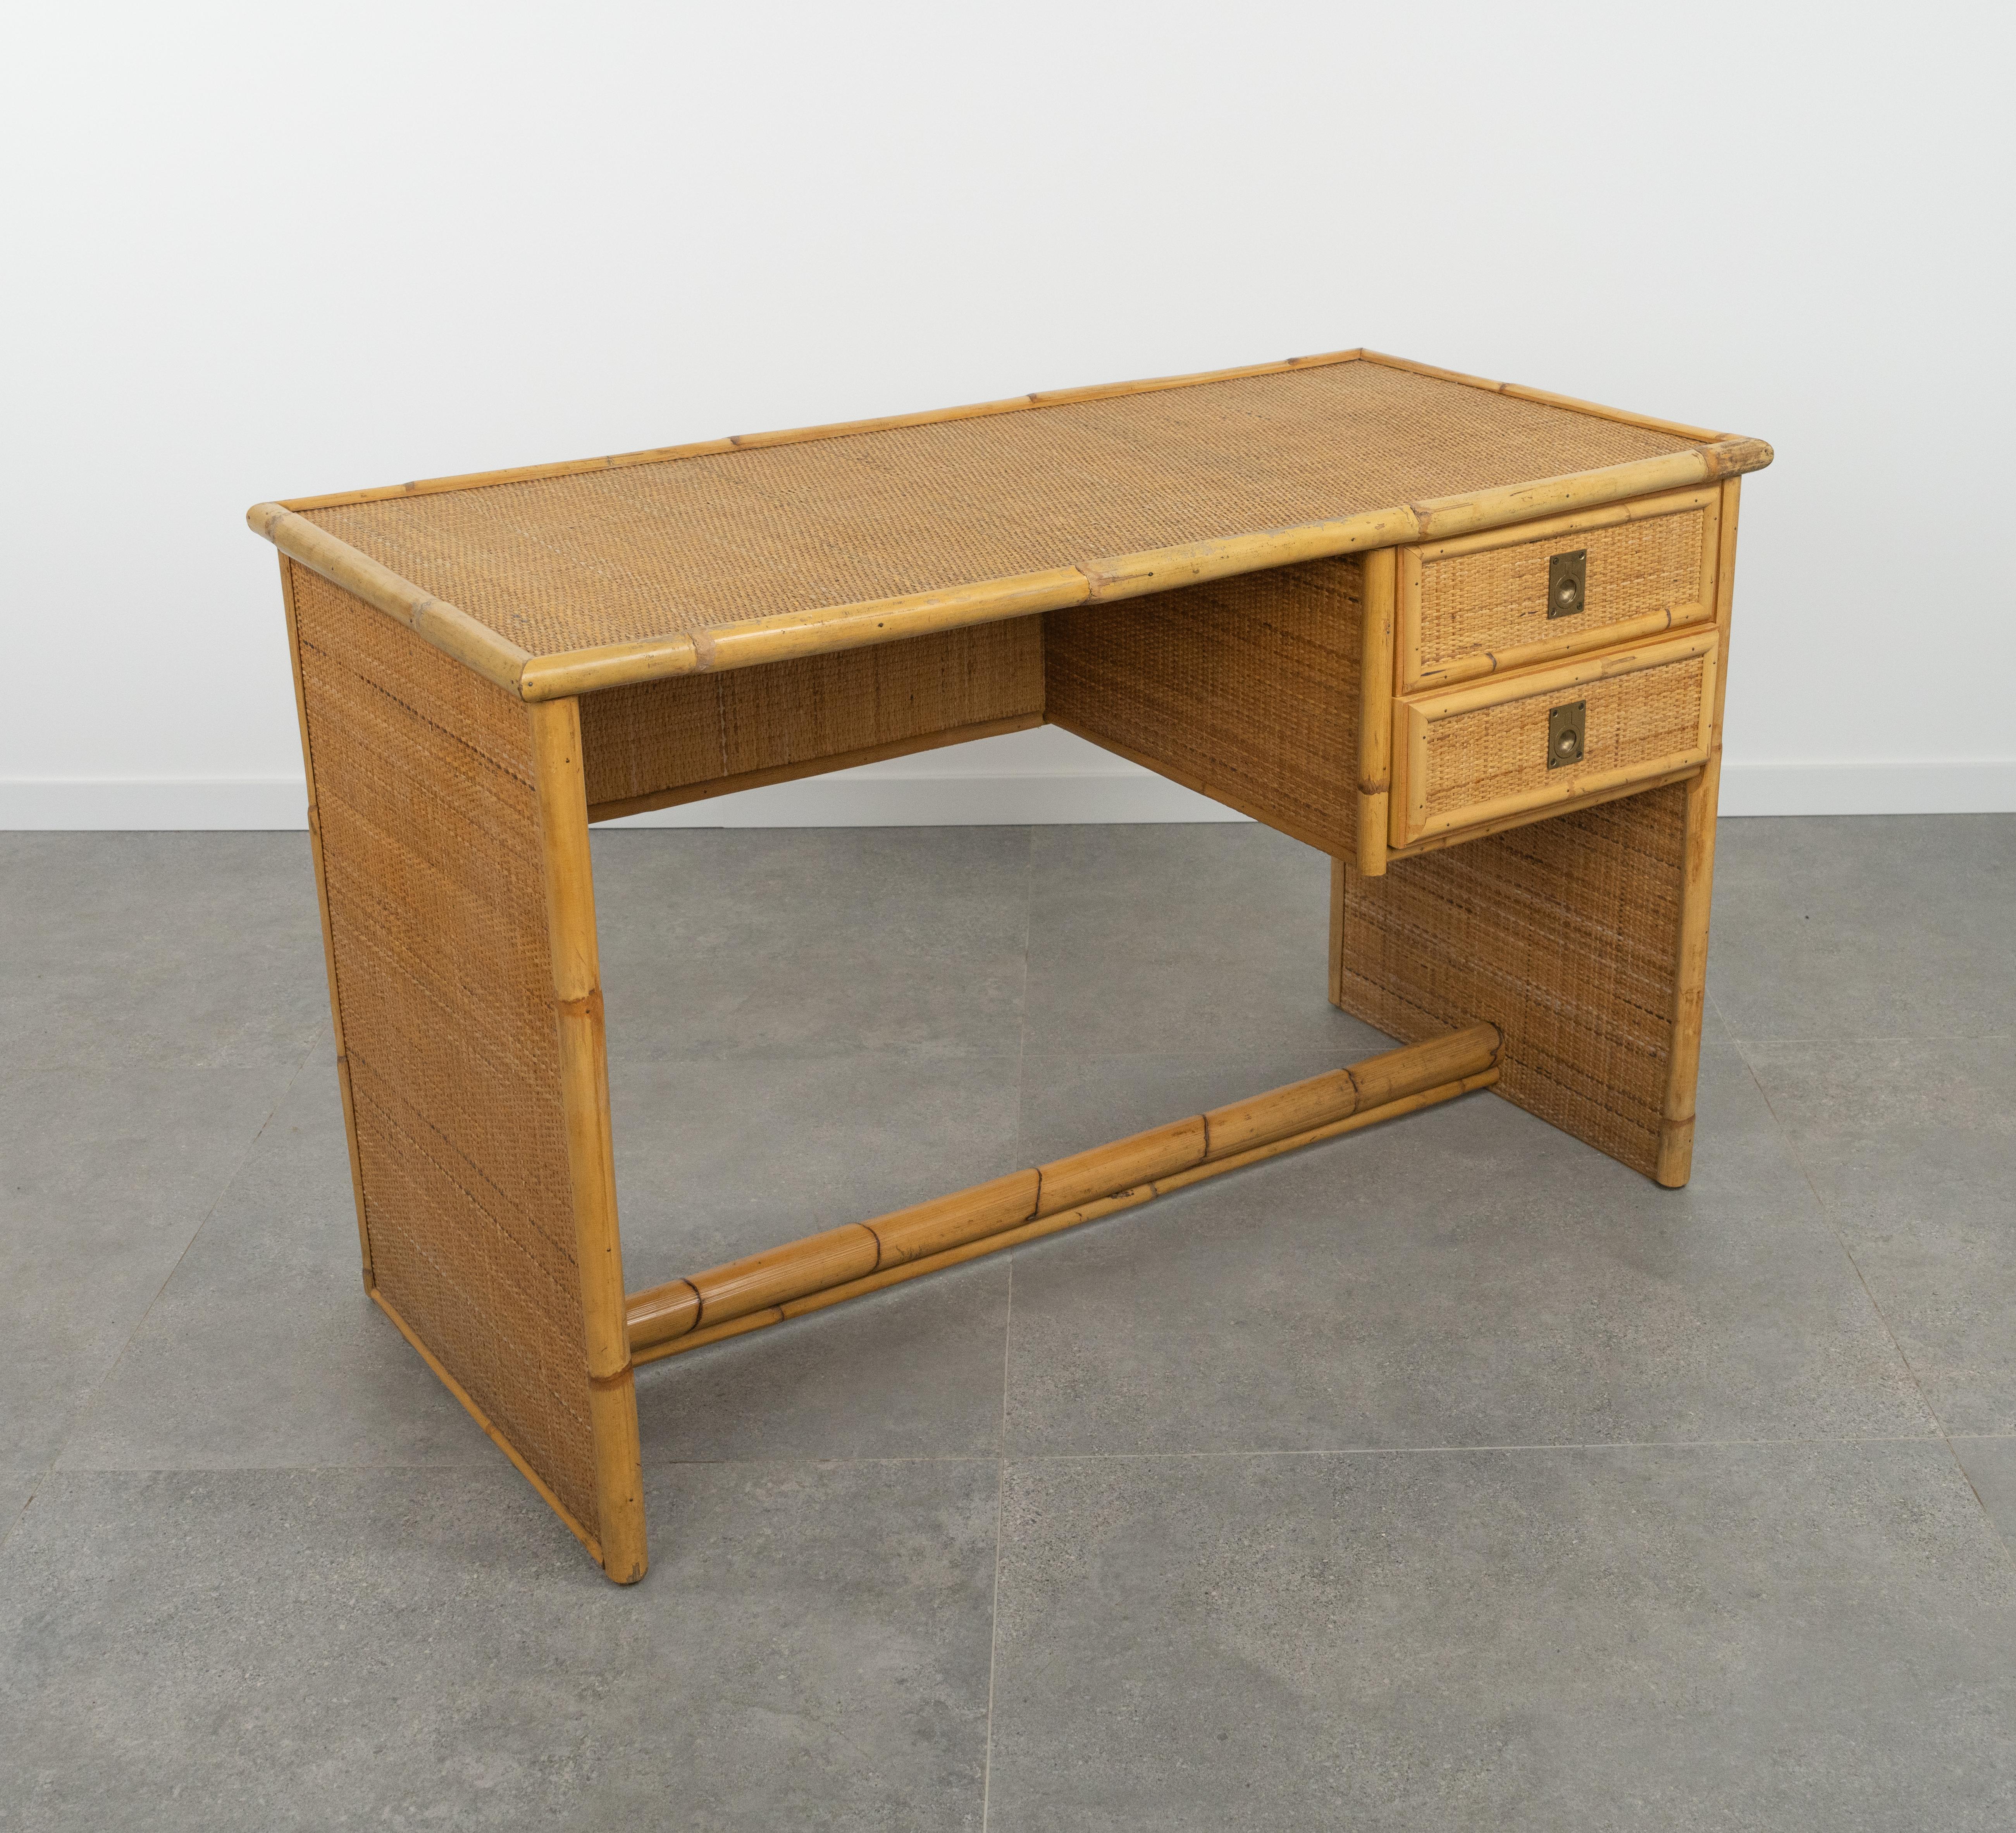 Midcentury Bamboo, Rattan & Wicker Writing Desk Table  by Dal Vera, Italy 1960s For Sale 7